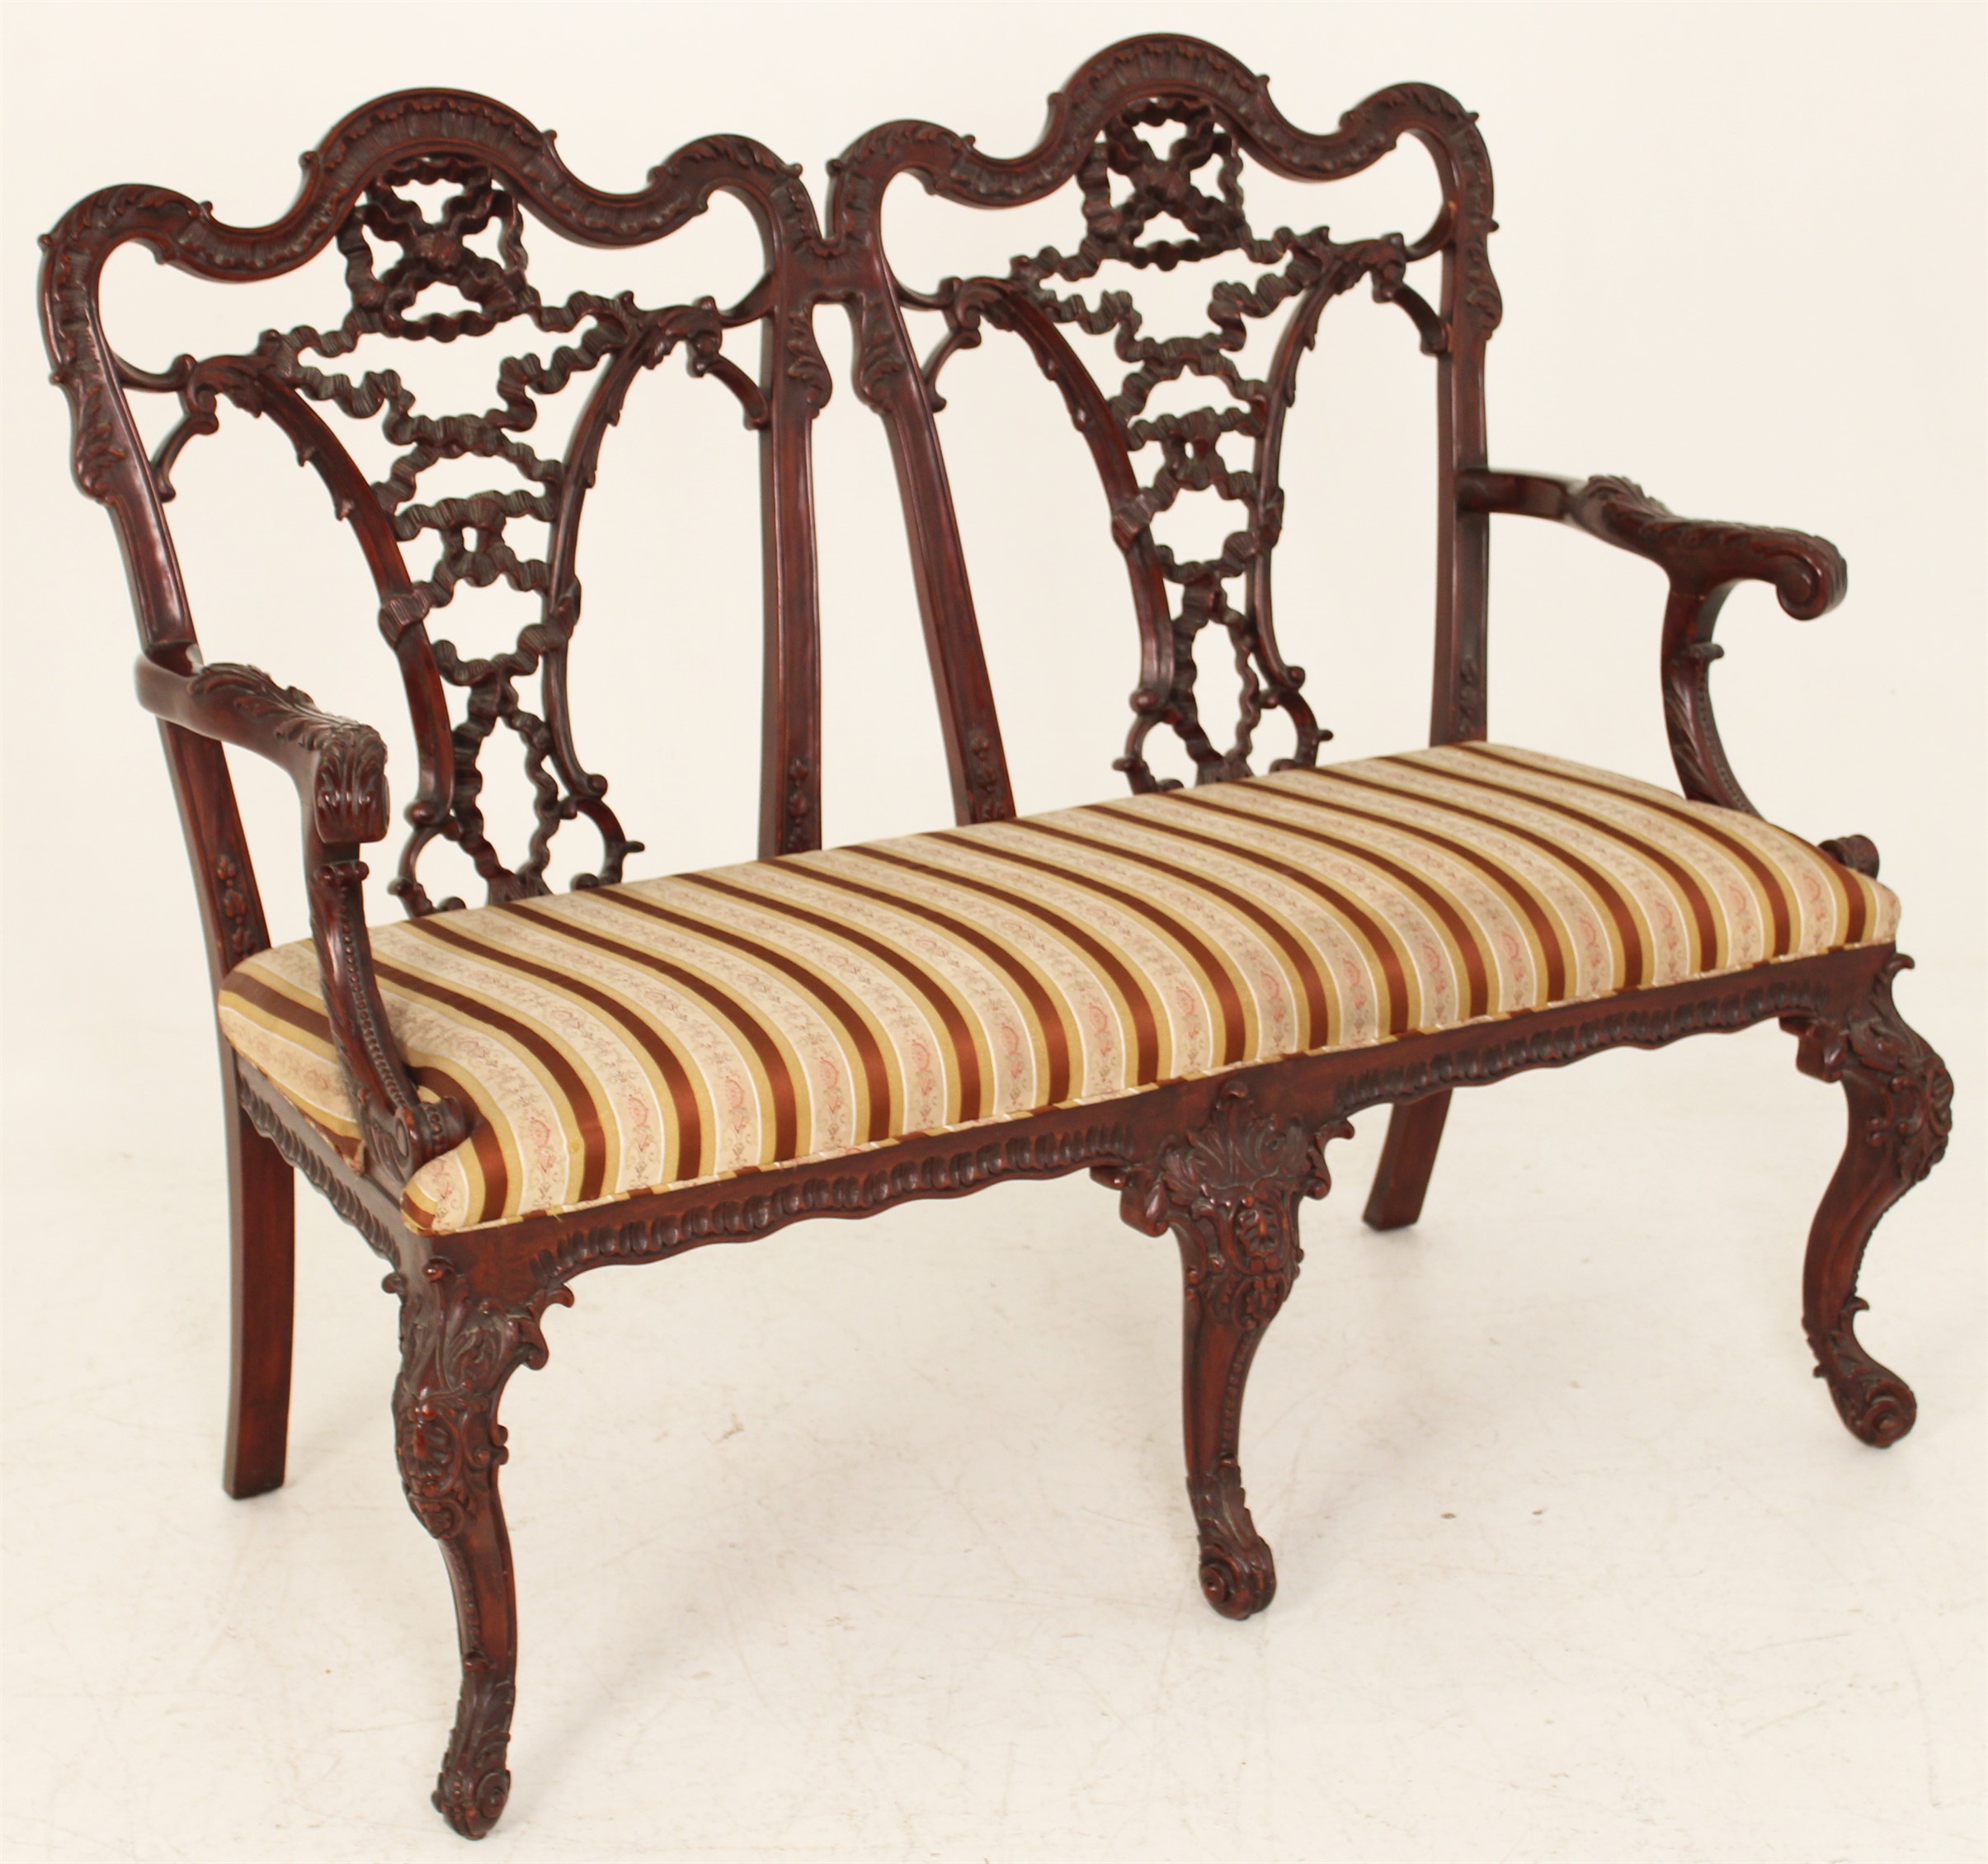 CHIPPENDALE STYLE MAHOGANY DOUBLE